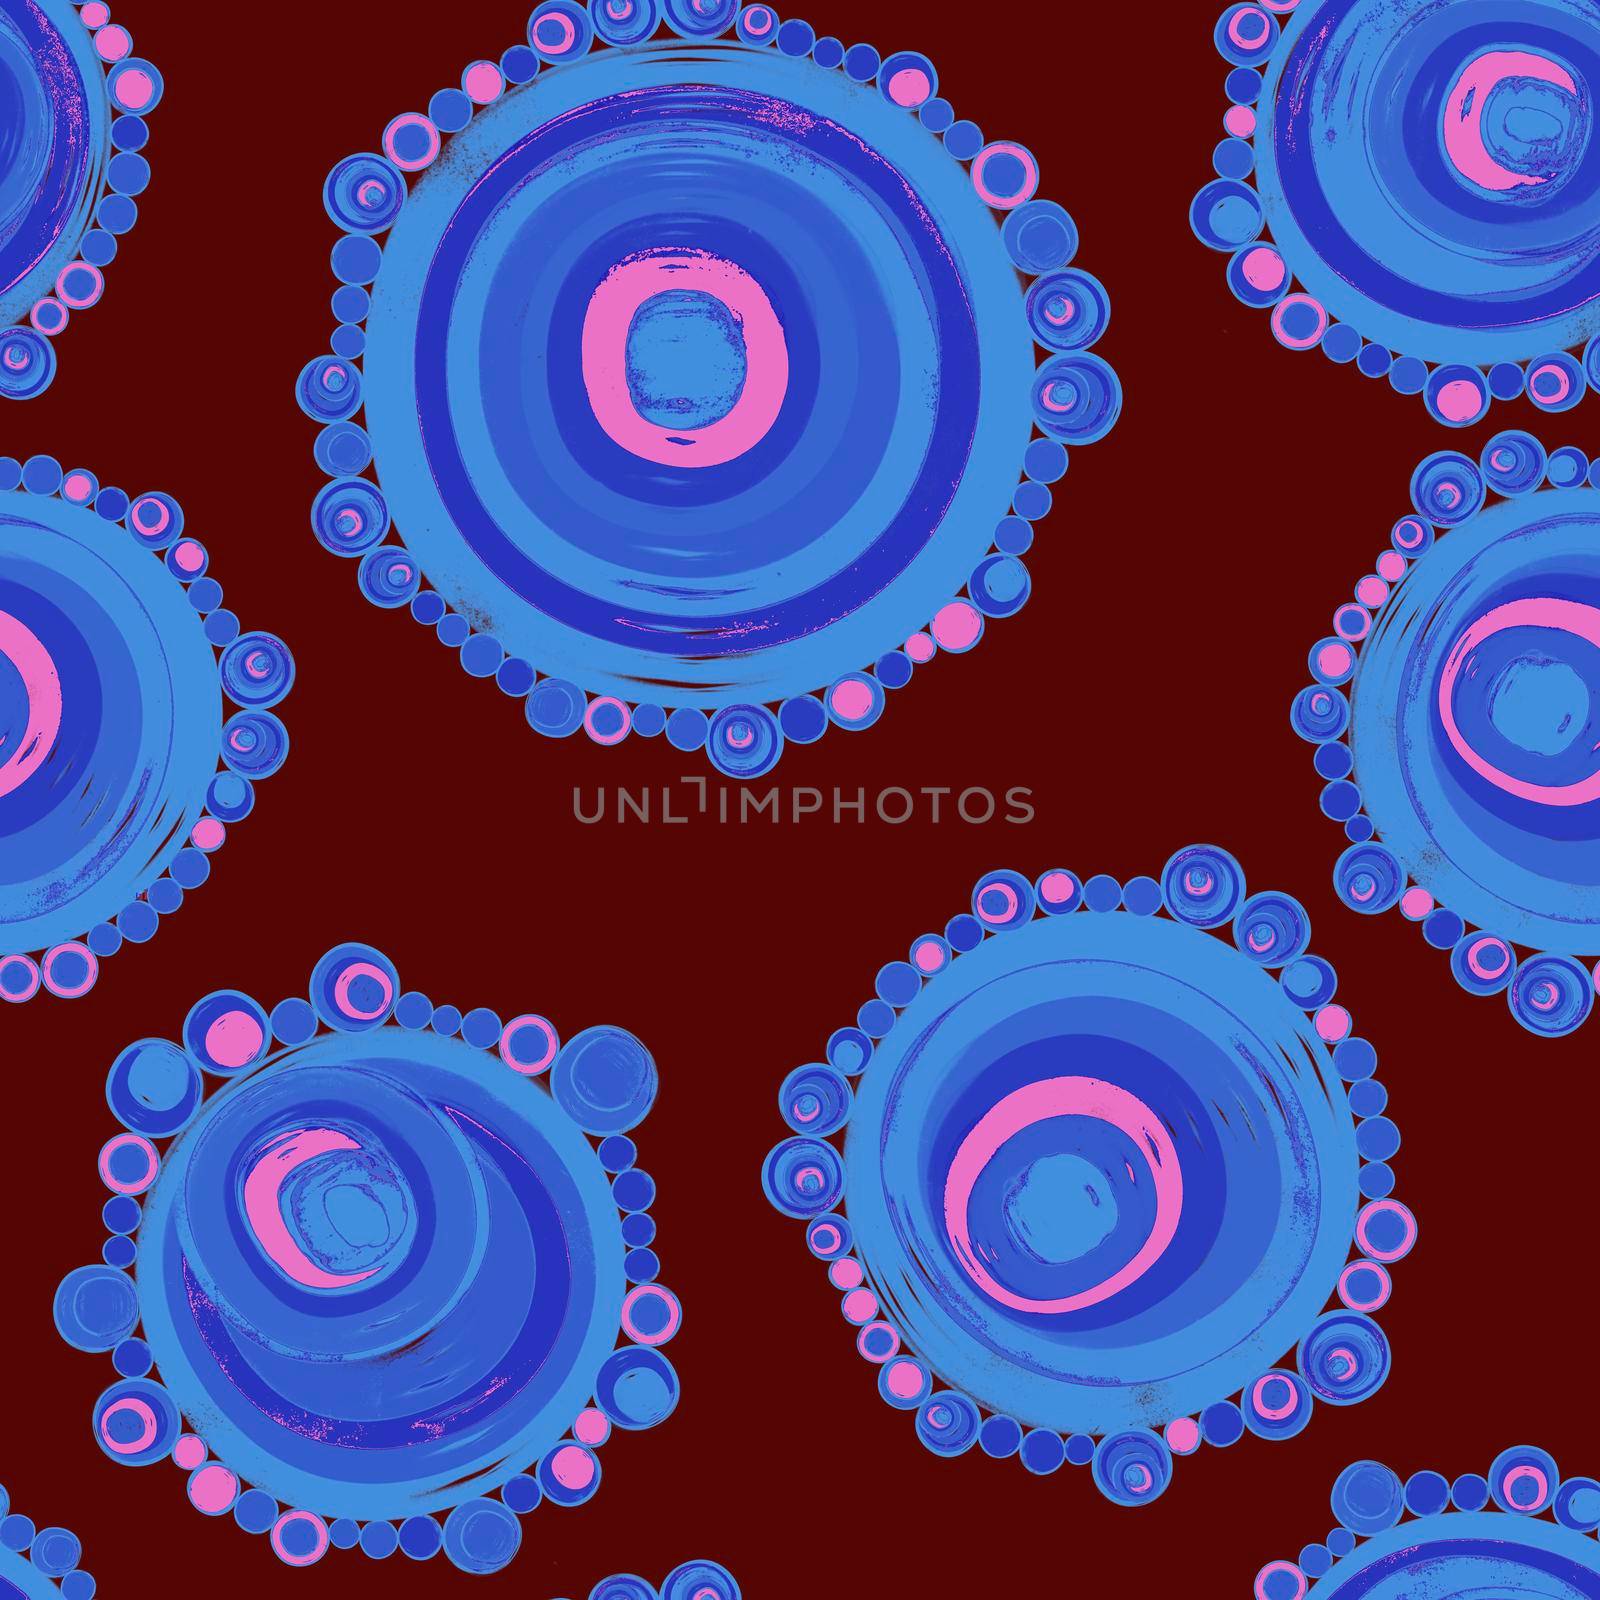 Geometric seamless pattern,texture with perfectly contacting nested circles with different size colors.Repeating pattern with circles filled with dots.For textile,wrapping paper,banner.Azure burgundy by Angelsmoon